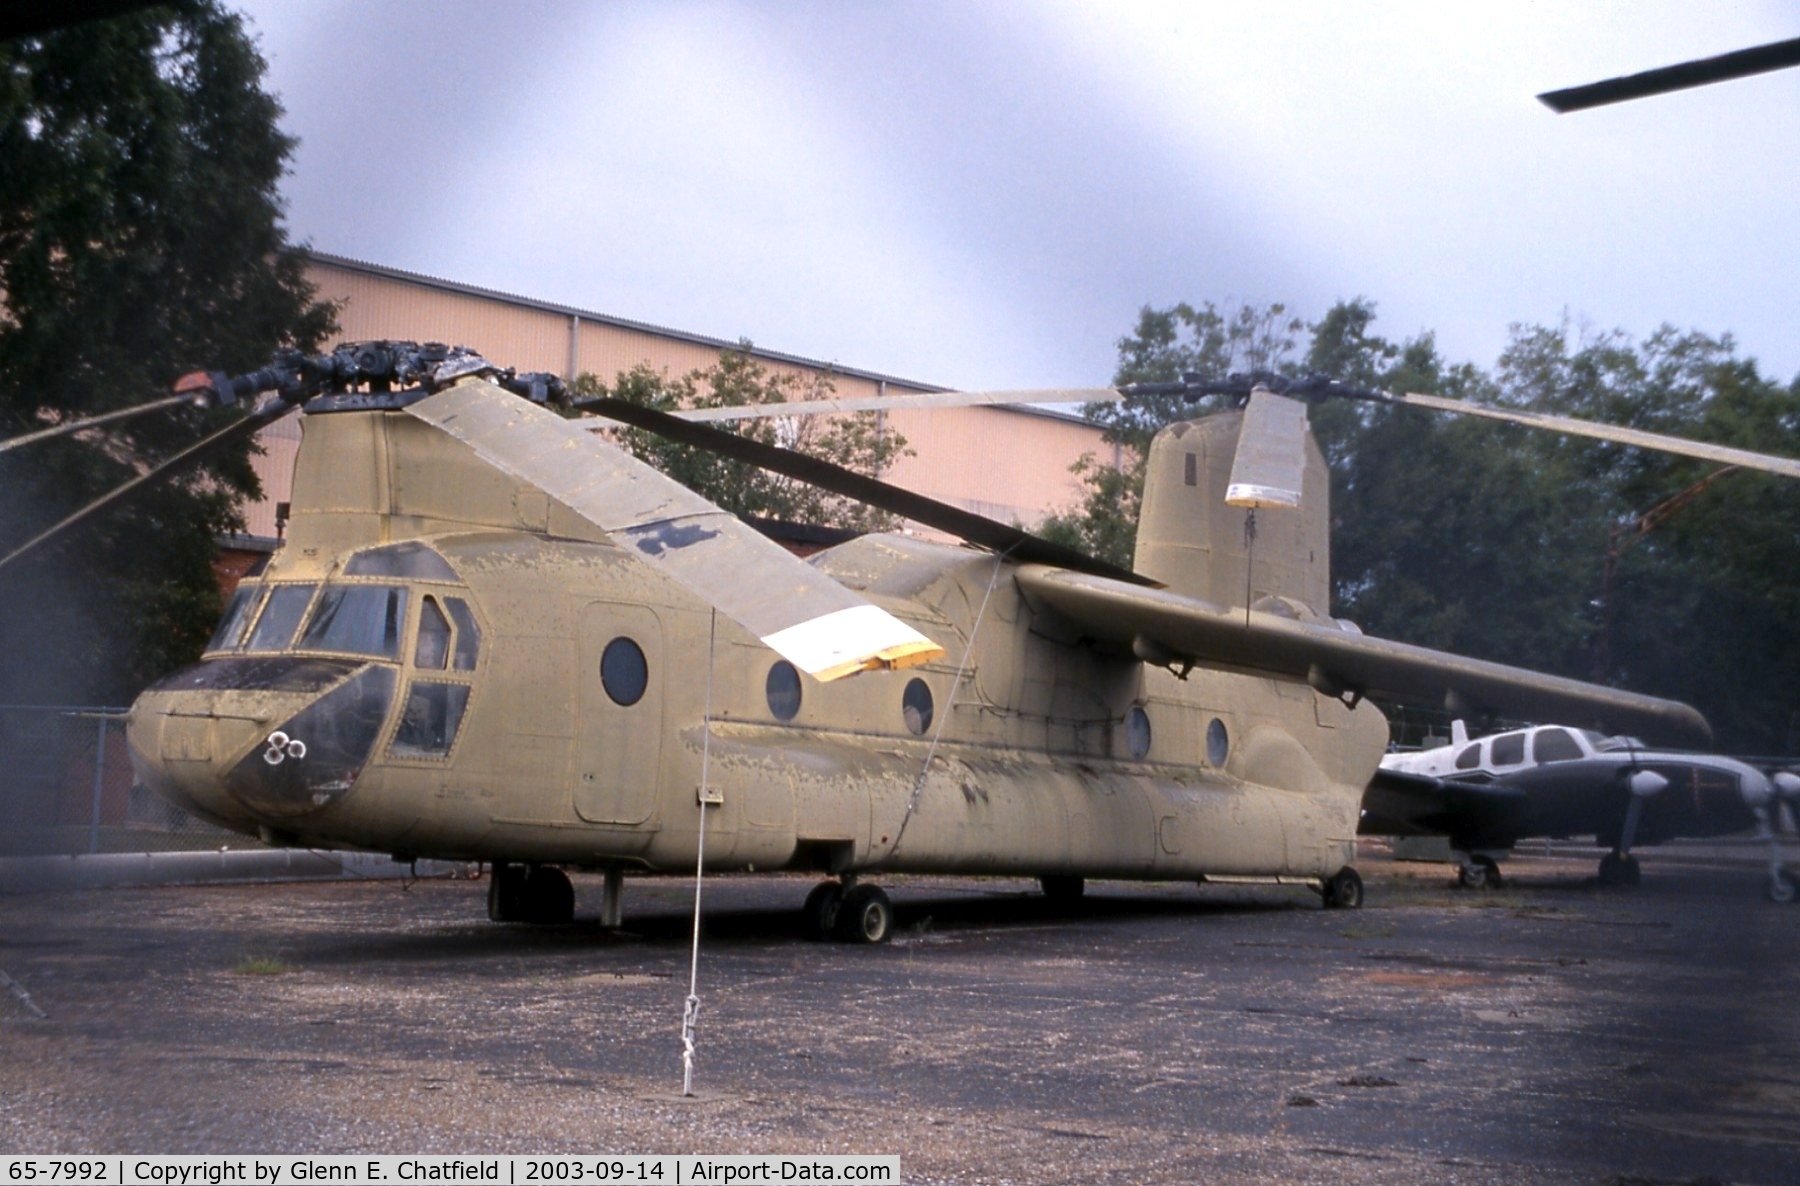 65-7992, 1965 Boeing Vertol CH-47A Chinook C/N B.164, CH-47A at the Army Aviation Museum.  It was modified as protoype BV-347 by stretching the cabin, retractable gear, 4-blade rotors, and wing.  Photo shot through chain-link.